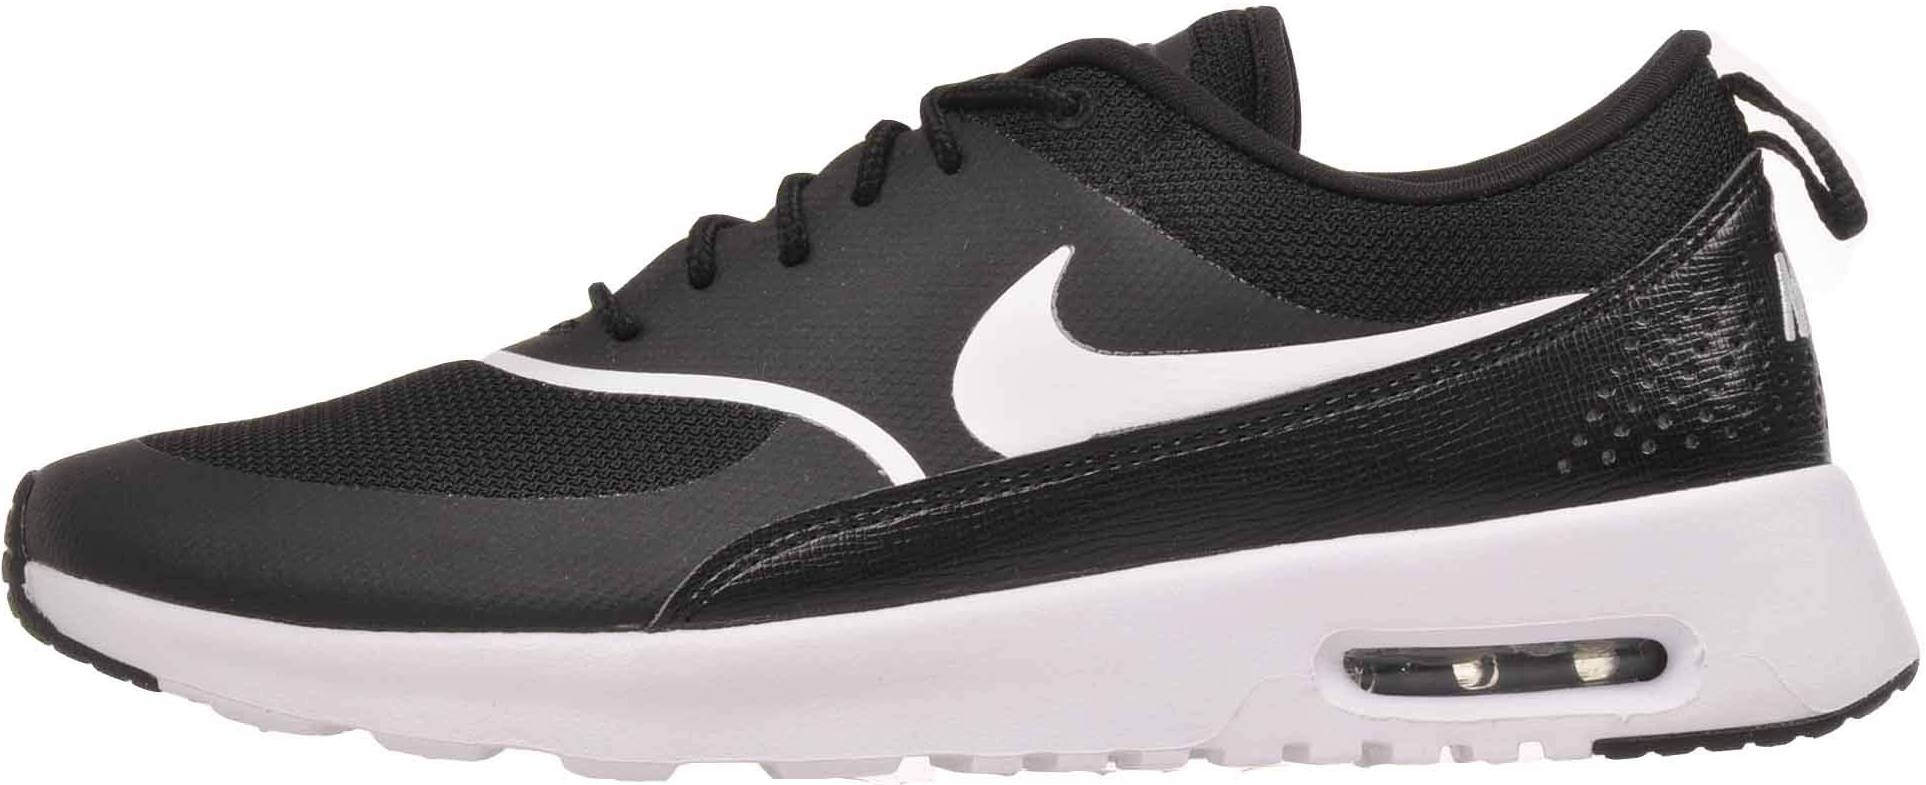 Only $39 + Review of Nike Air Max Thea 